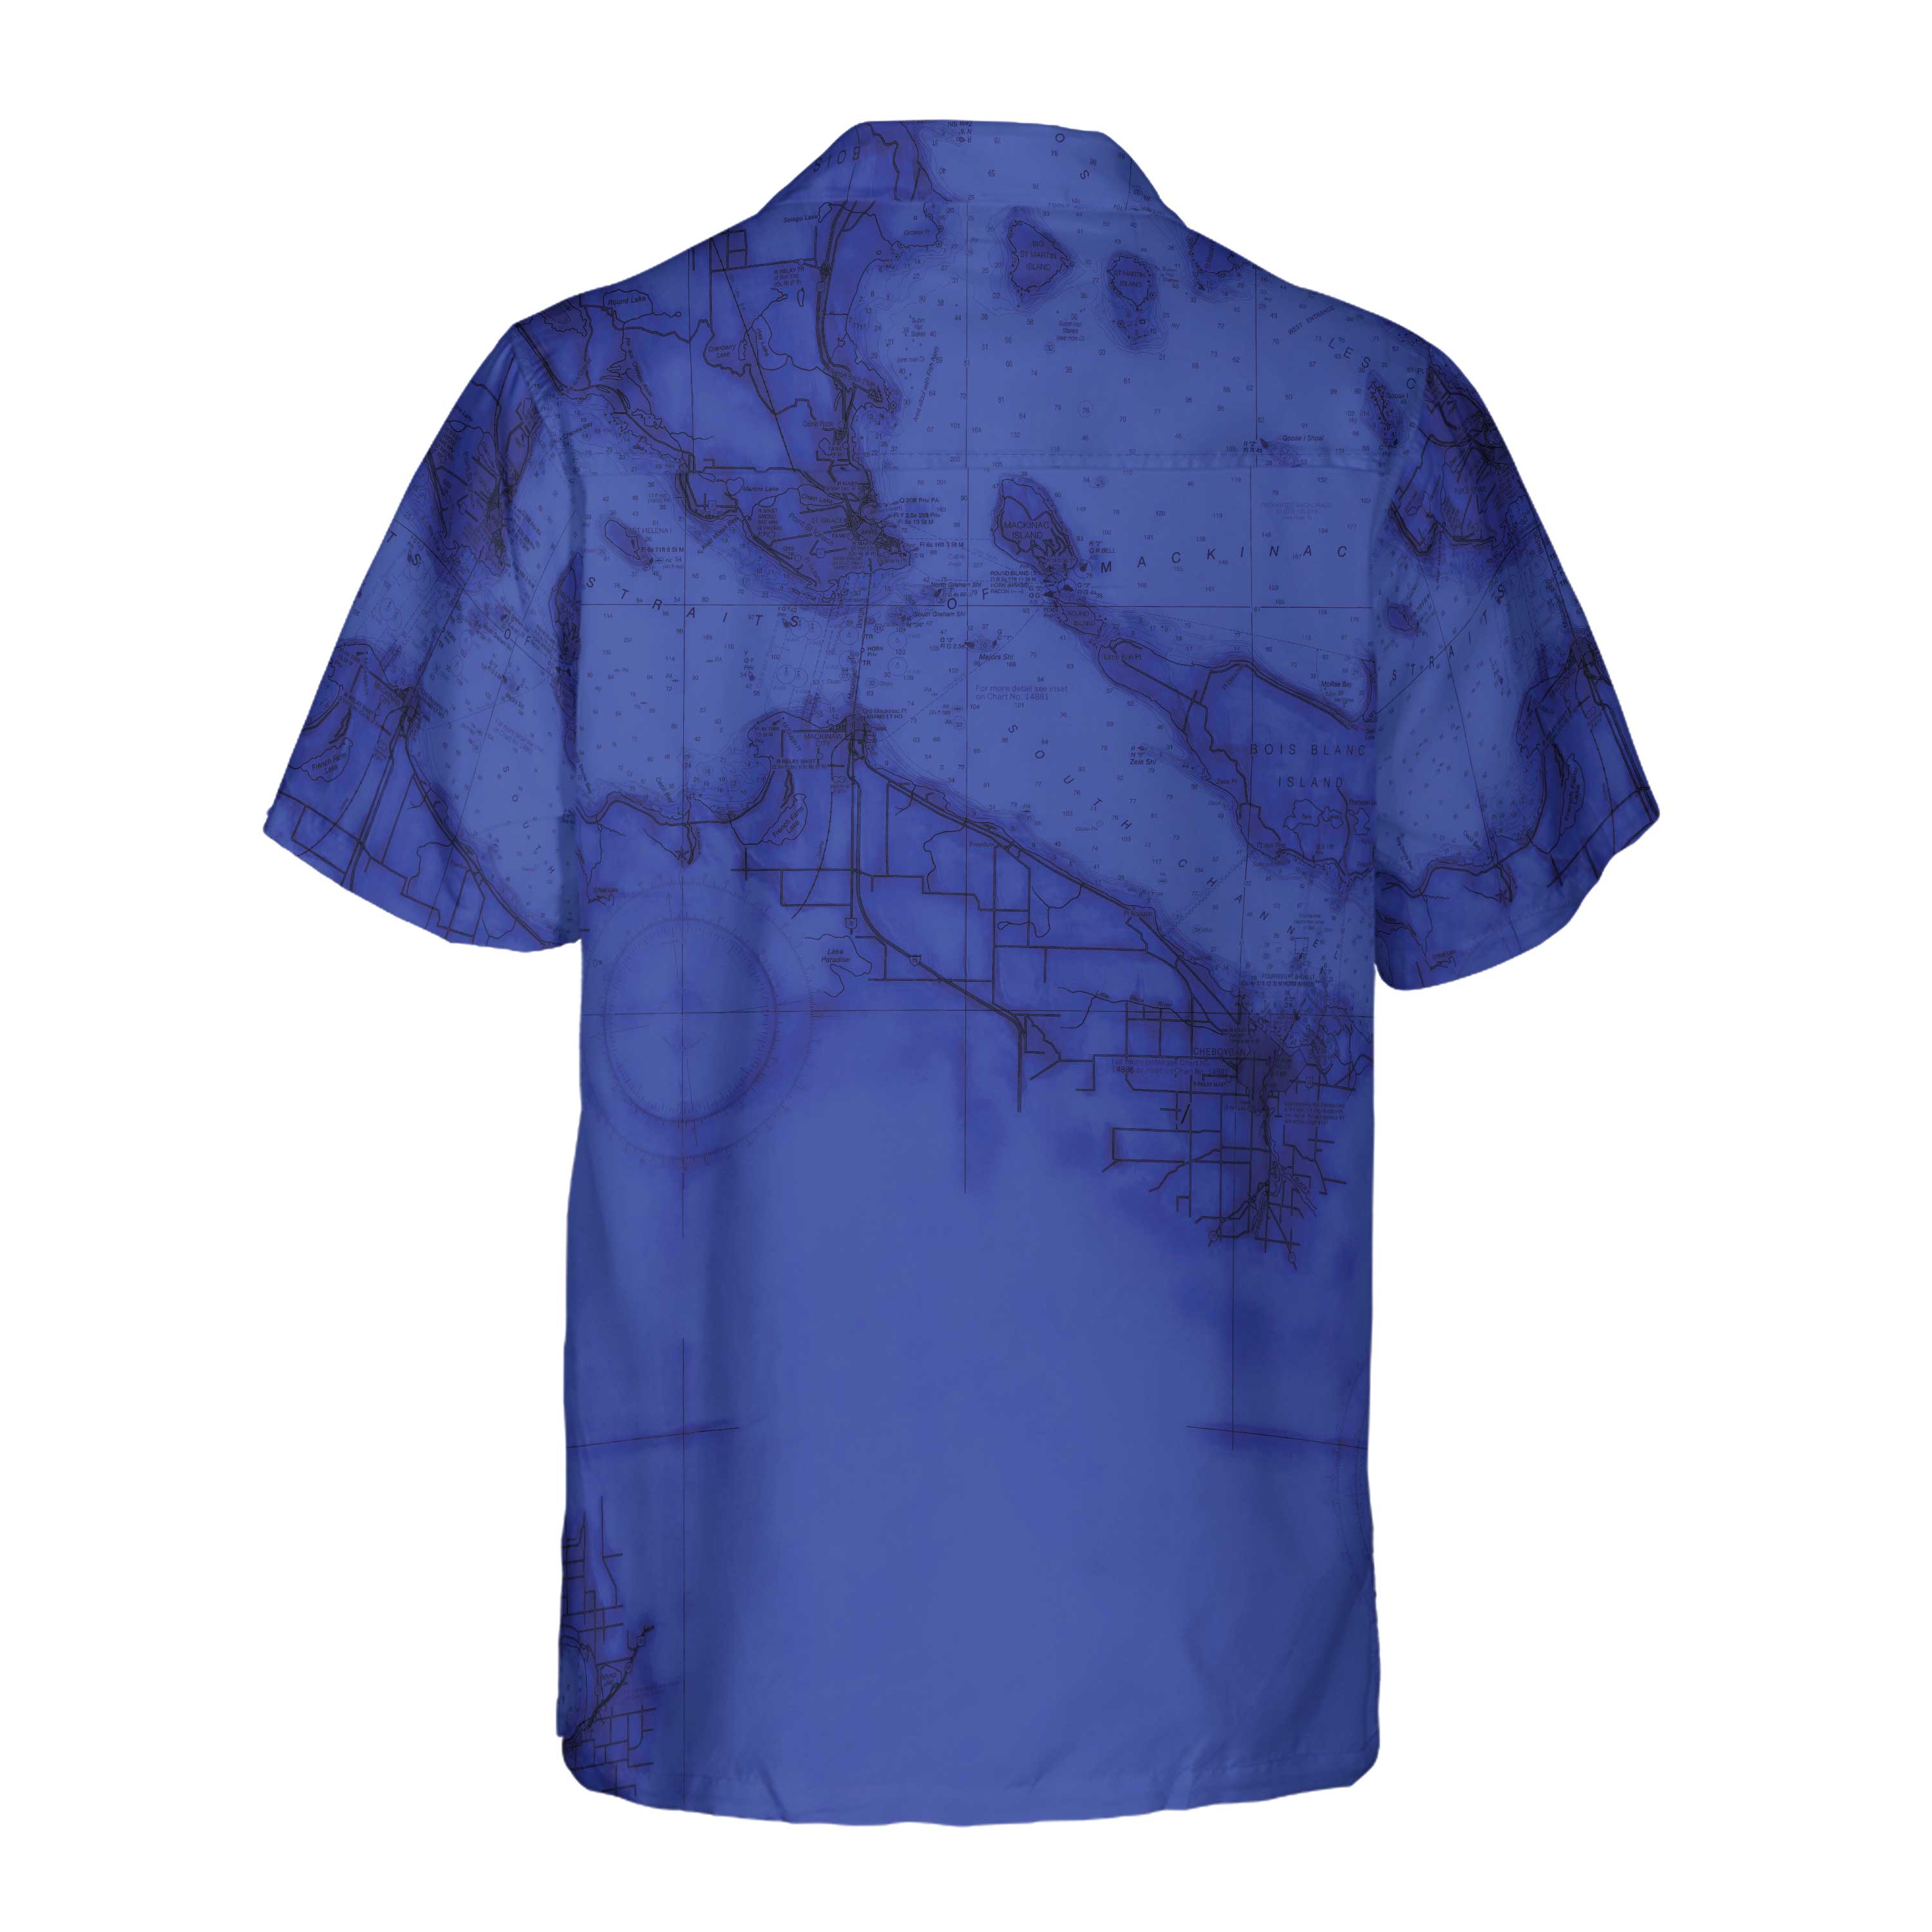 The Straits of Mackinac Coconut Button Camp Shirt